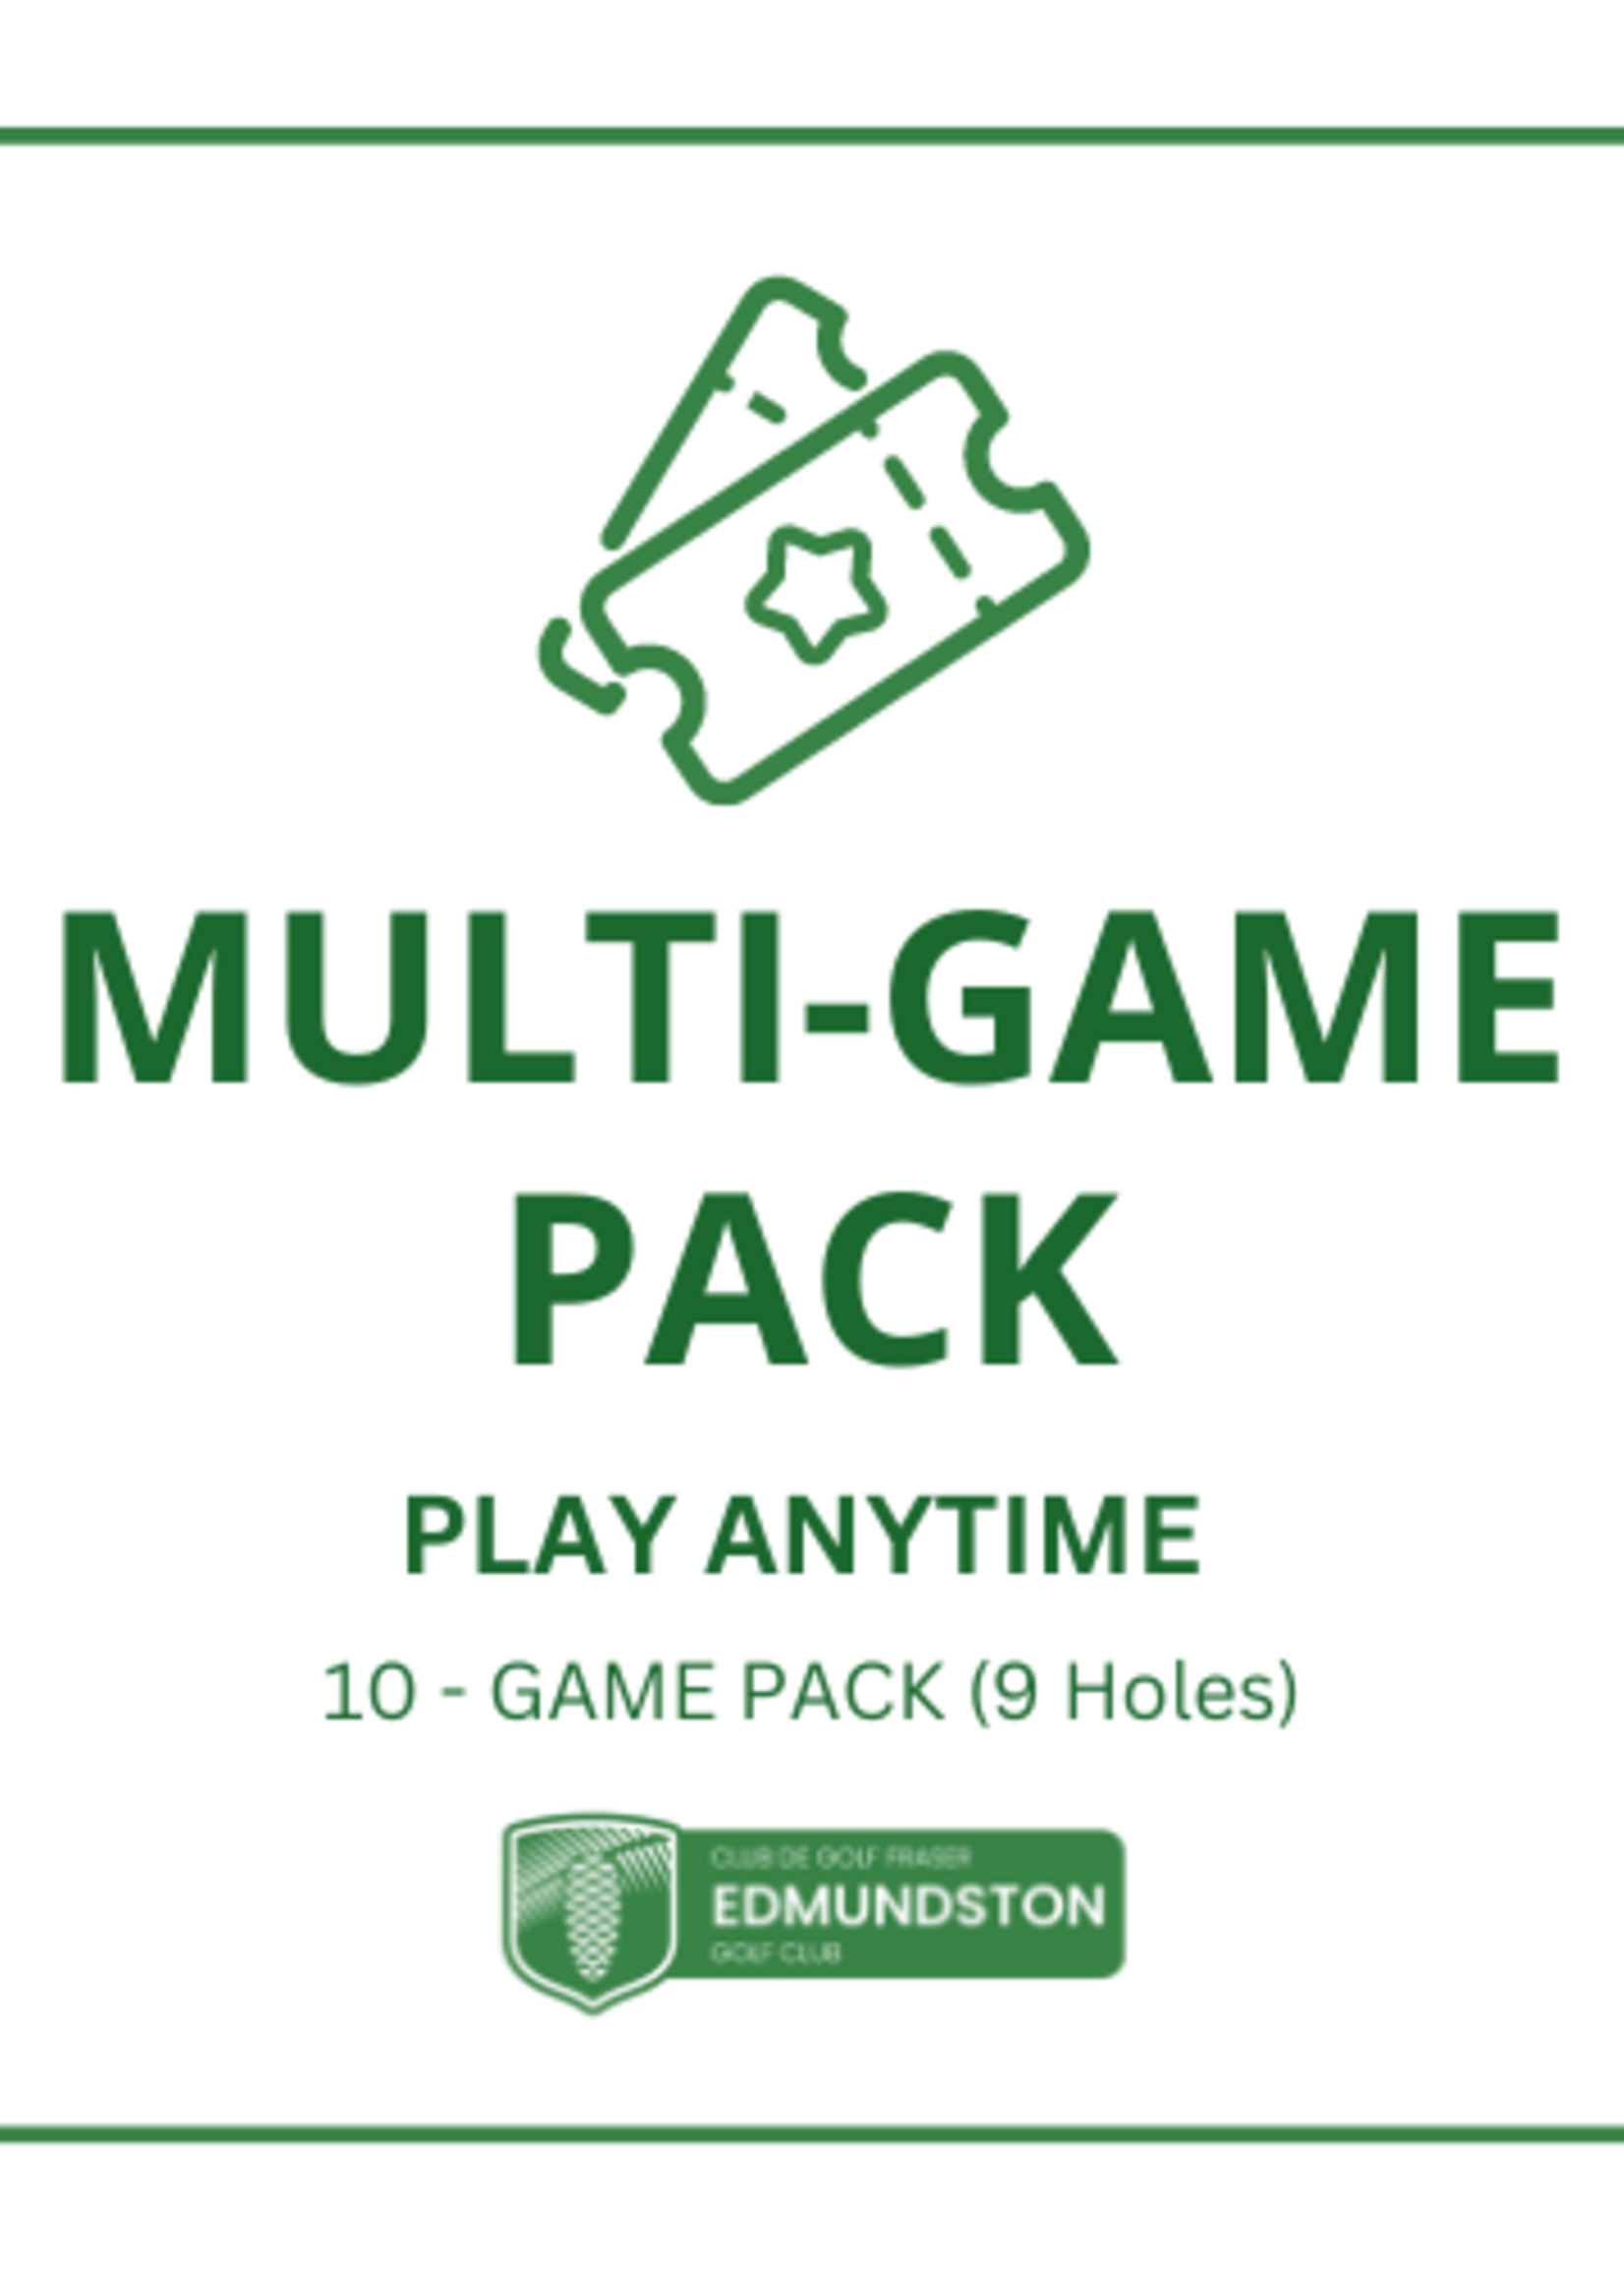 10-GAME PACKS PLAY ANYTIME (9 HOLES) - 10-GAME PACK PLAY ANYTIME (9 holes)